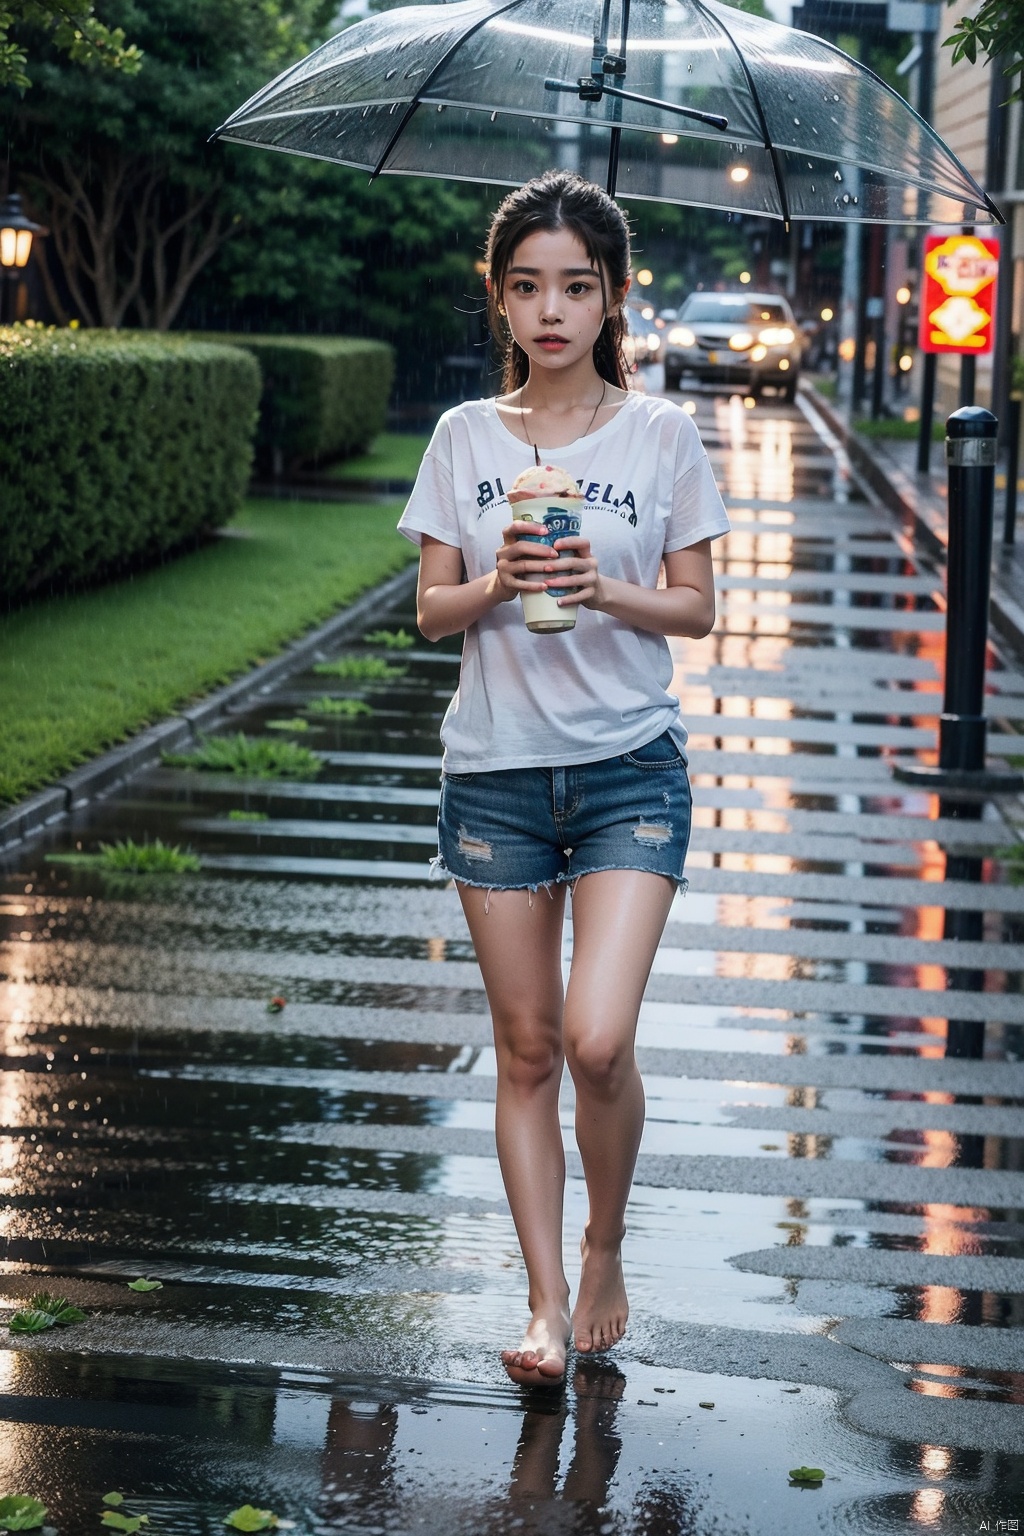  Young girl with umbrella, walking in the rain, barefoot, barefoot walking on the wet street, alone, wet body, the ground covered with fallen flowers, add detail, add background, long broken silver hair, rainy summer night, short sleeve shorts, young girl, holding a cup of ice cream, followed by a little black pig at her feet, songyi